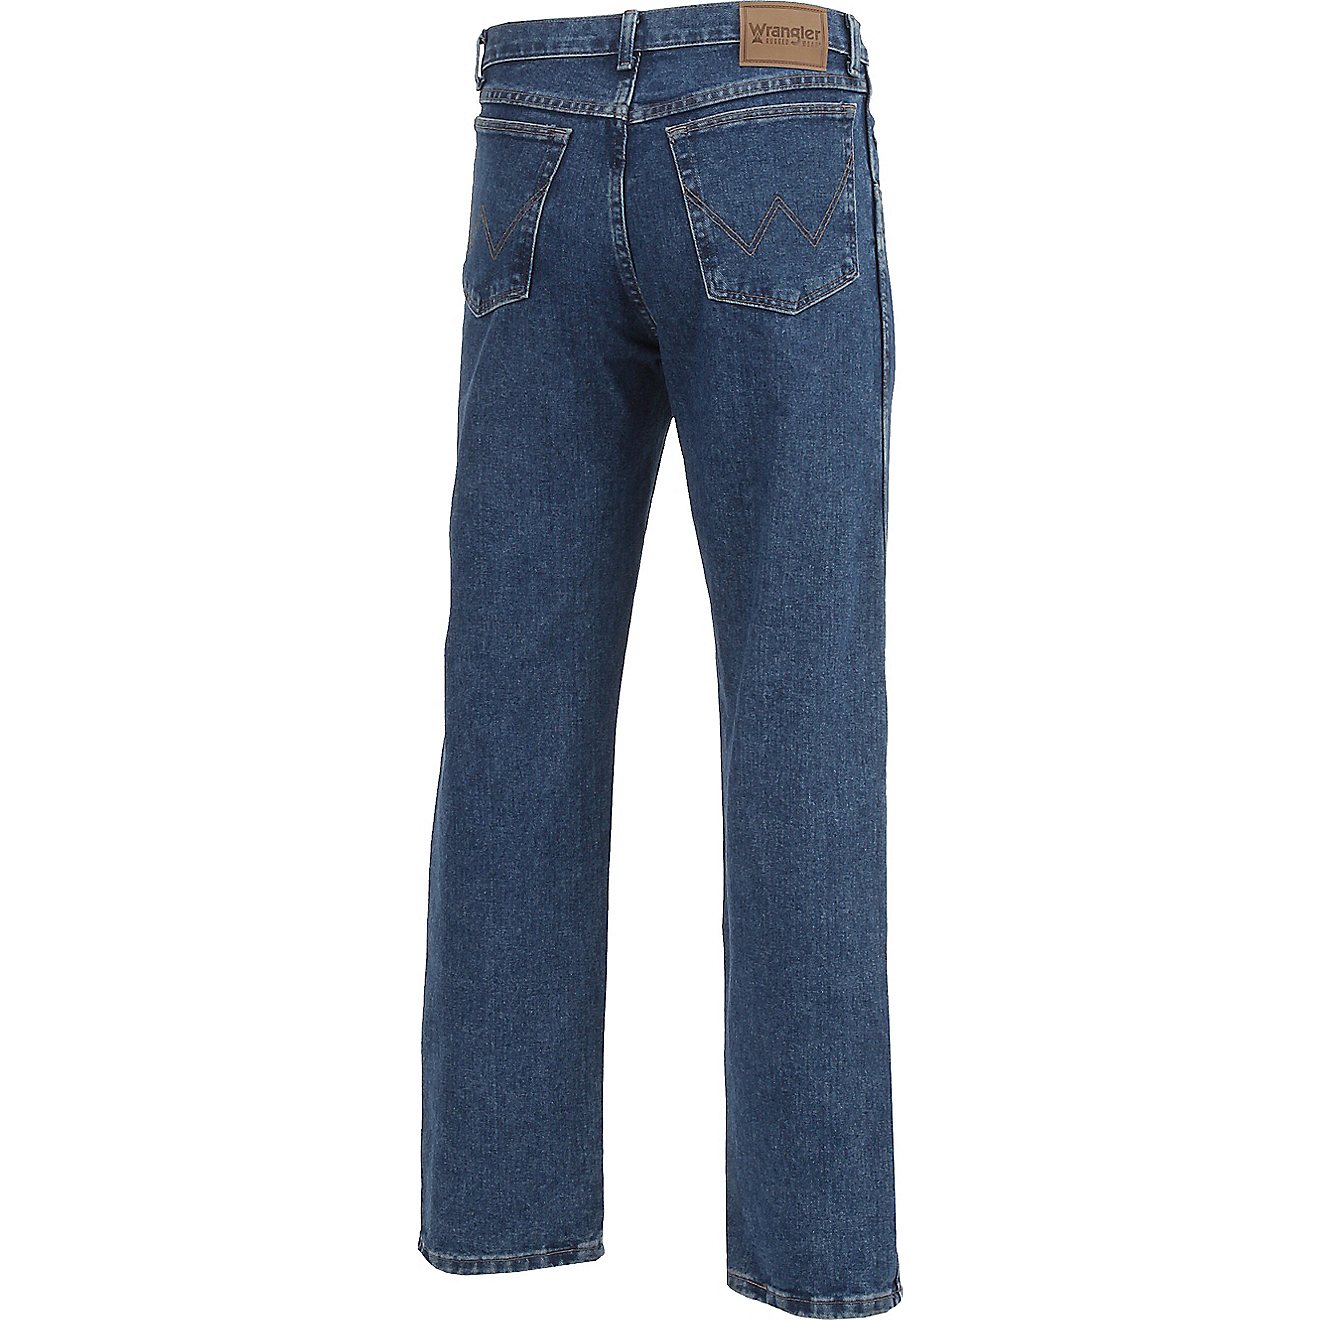 Wrangler Rugged Wear Men's Relaxed Fit Jean                                                                                      - view number 2